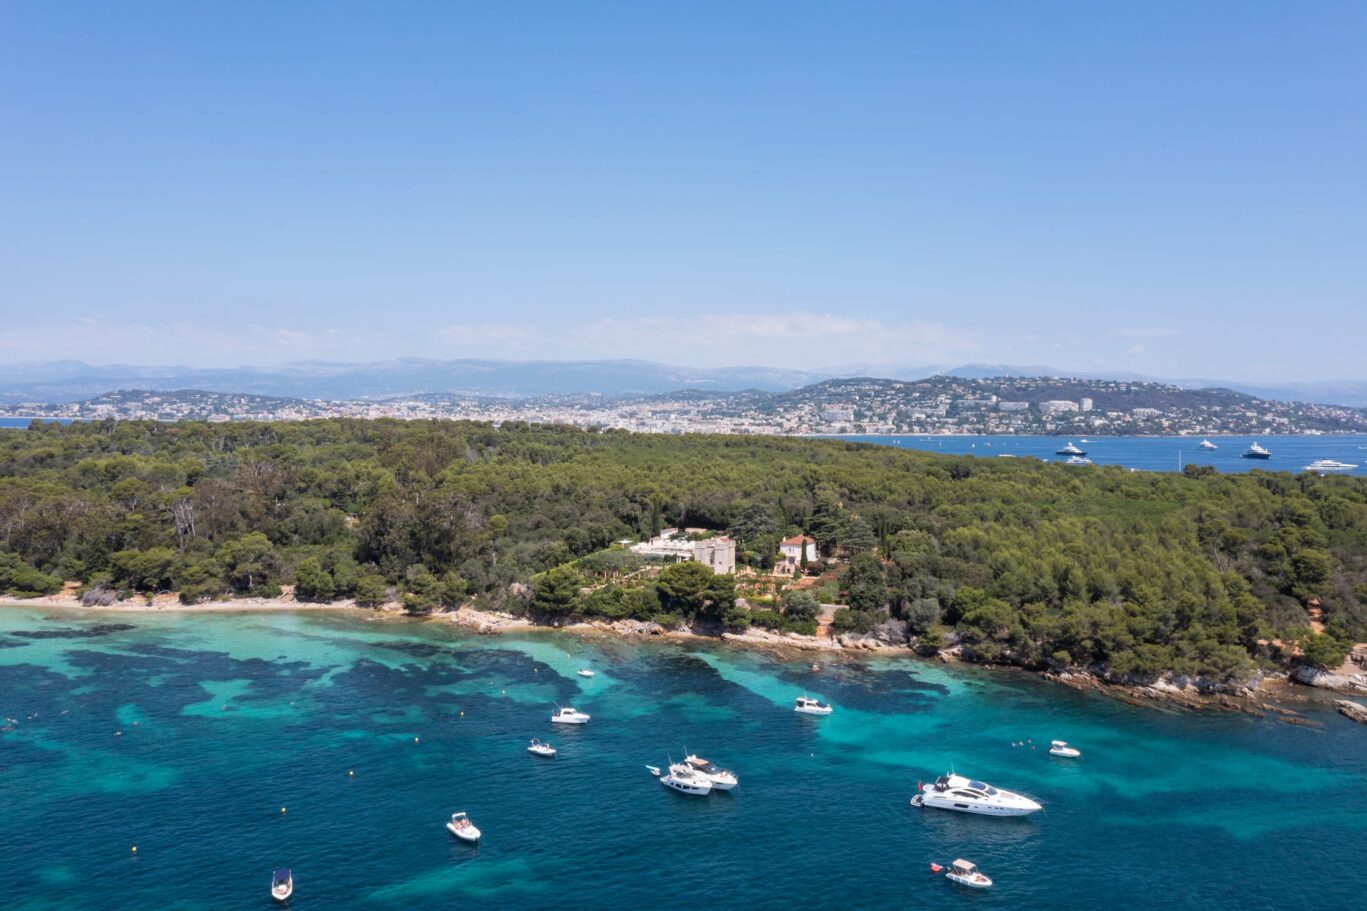 Boat-dotted waters surrounded the luscious Le Grand Jardin, Cannes